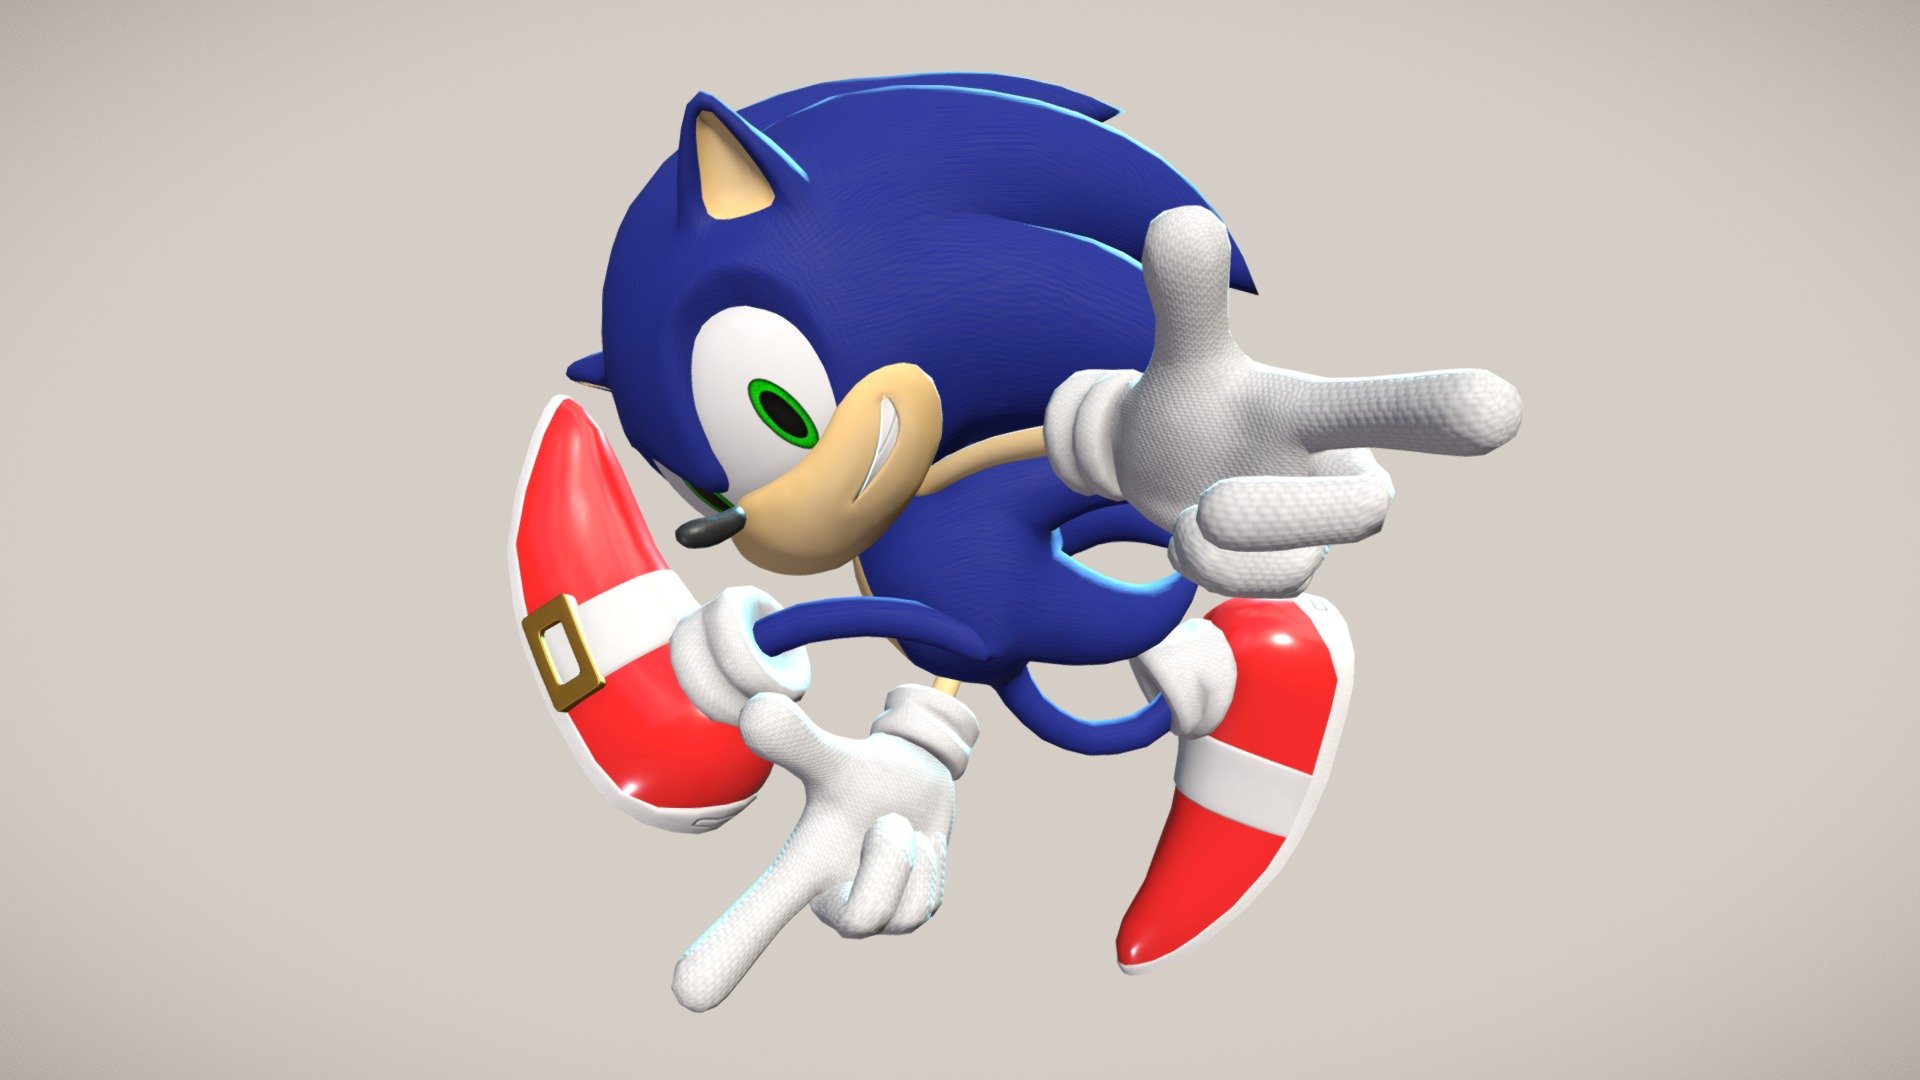 Sonic Adventure Sonic Model Download Free 3D Model By Smithbrianjr0 ...